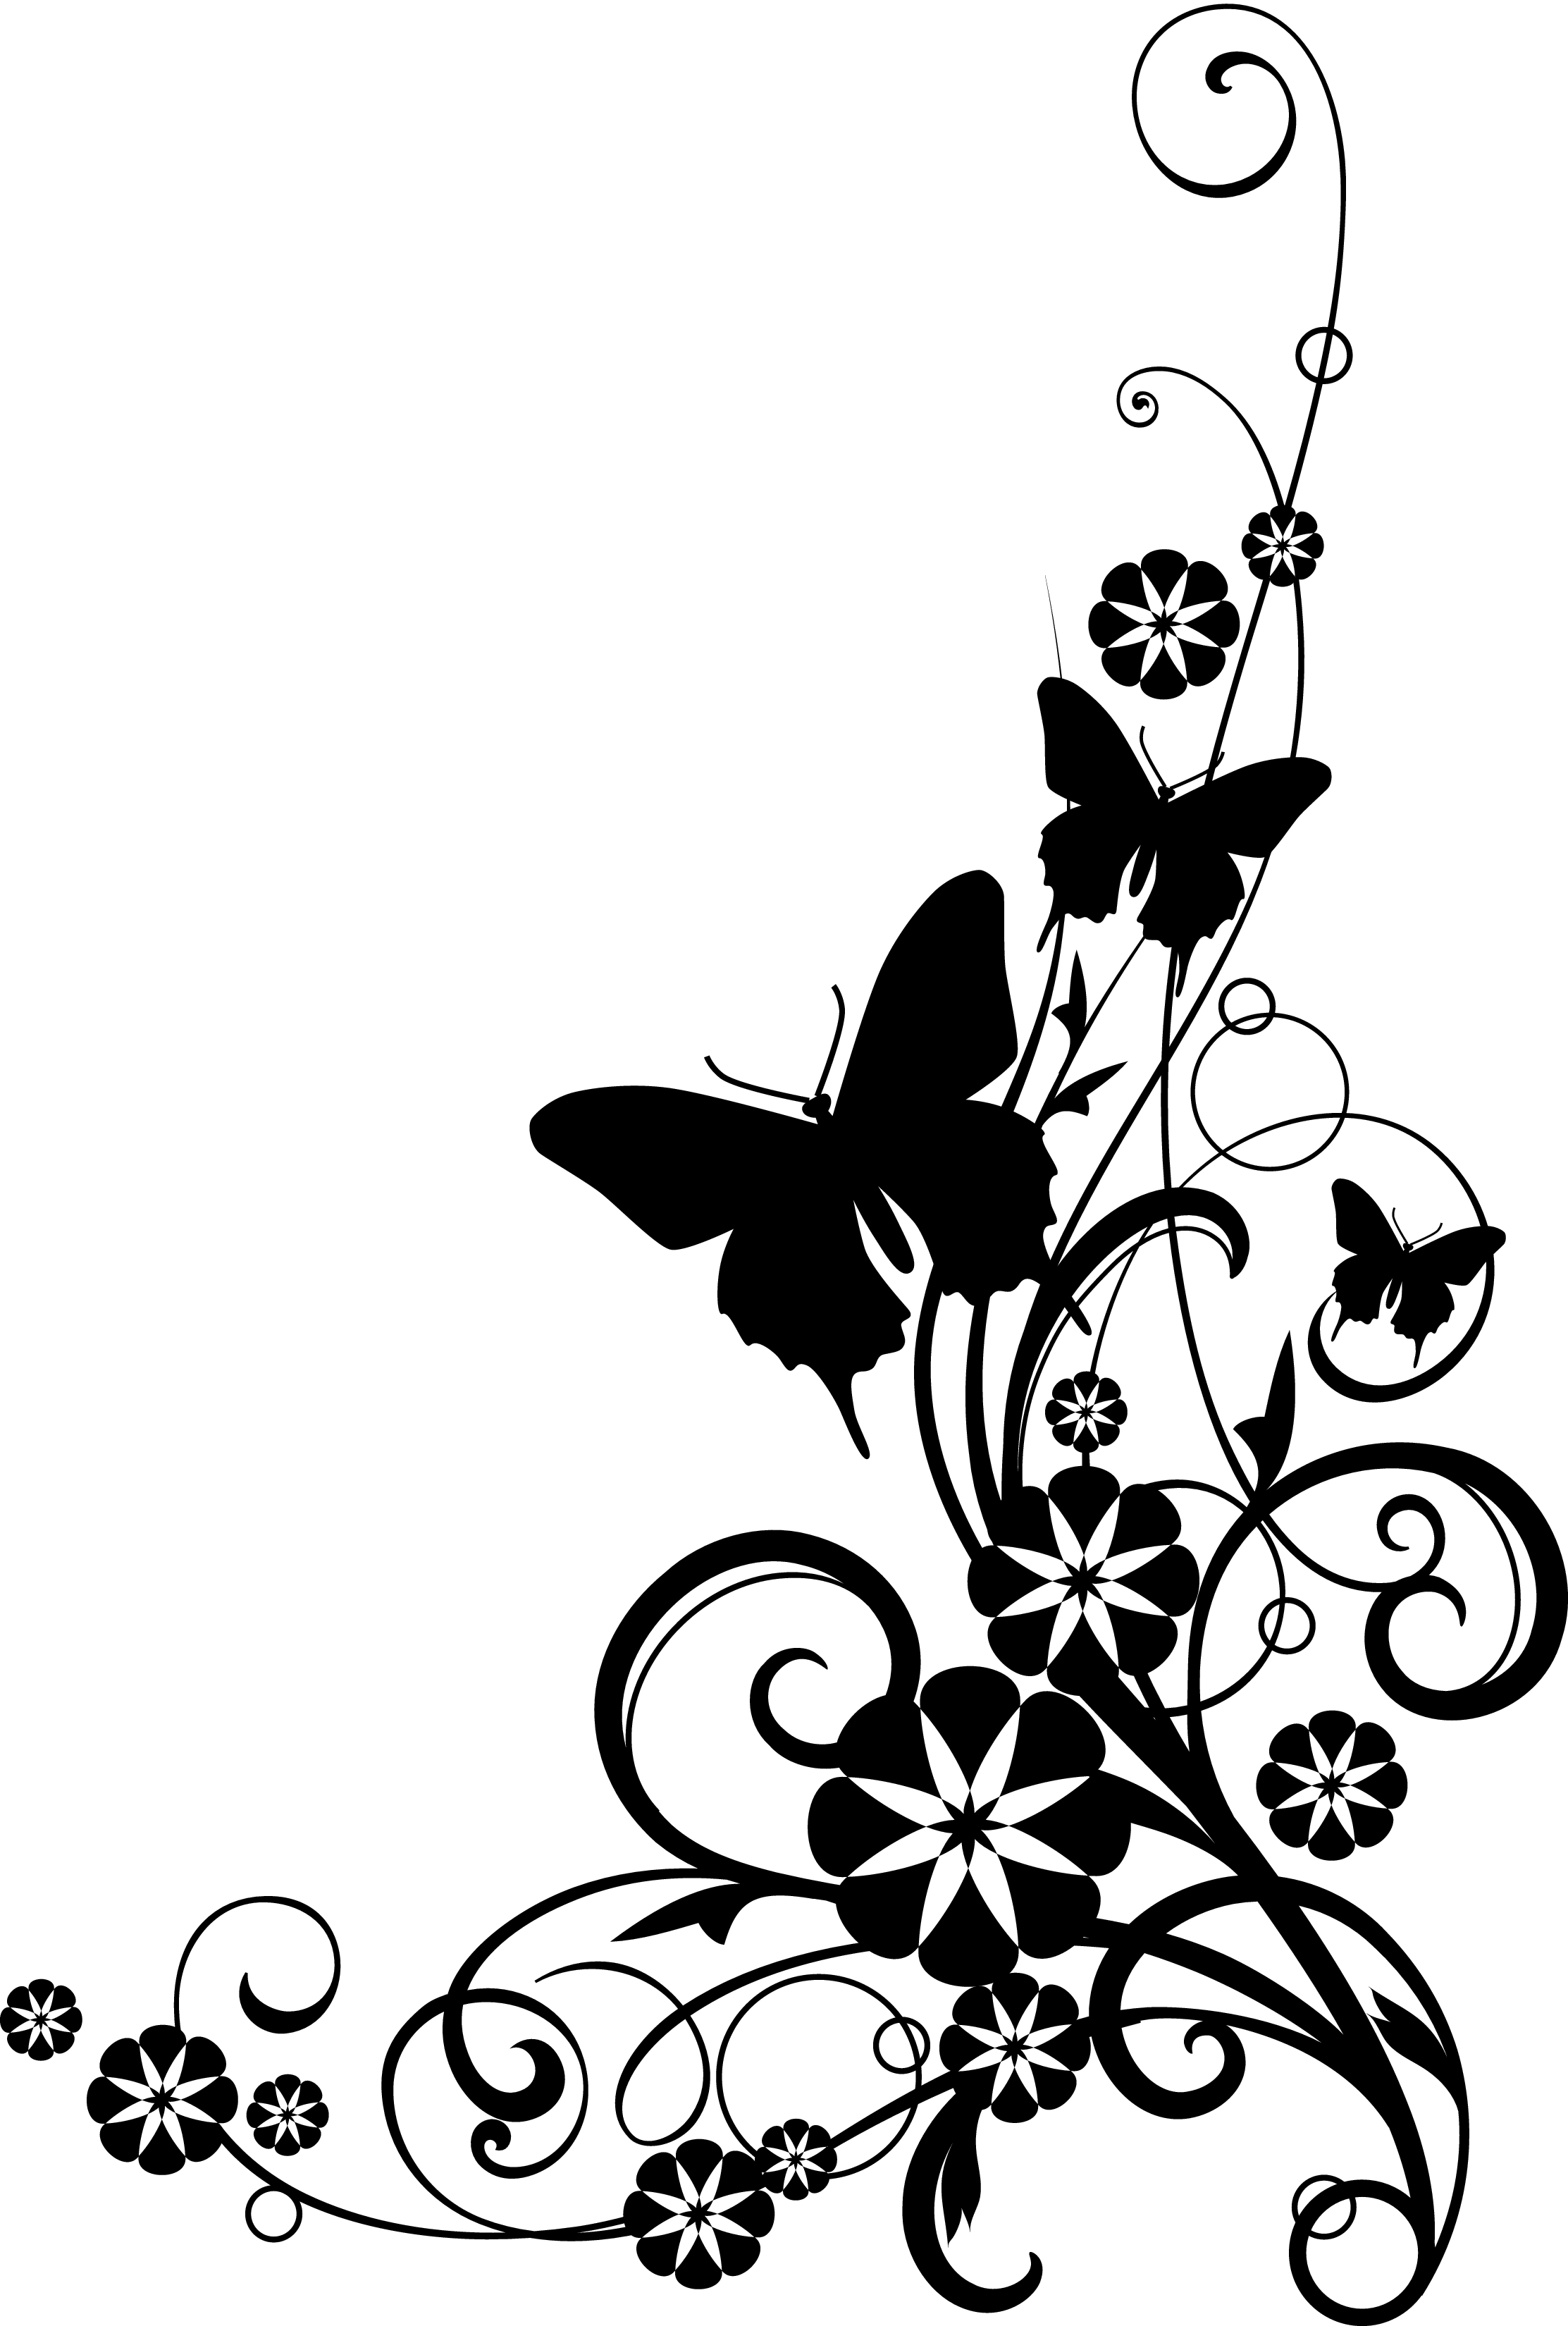 Flower Clip Art Black and White Butterfly